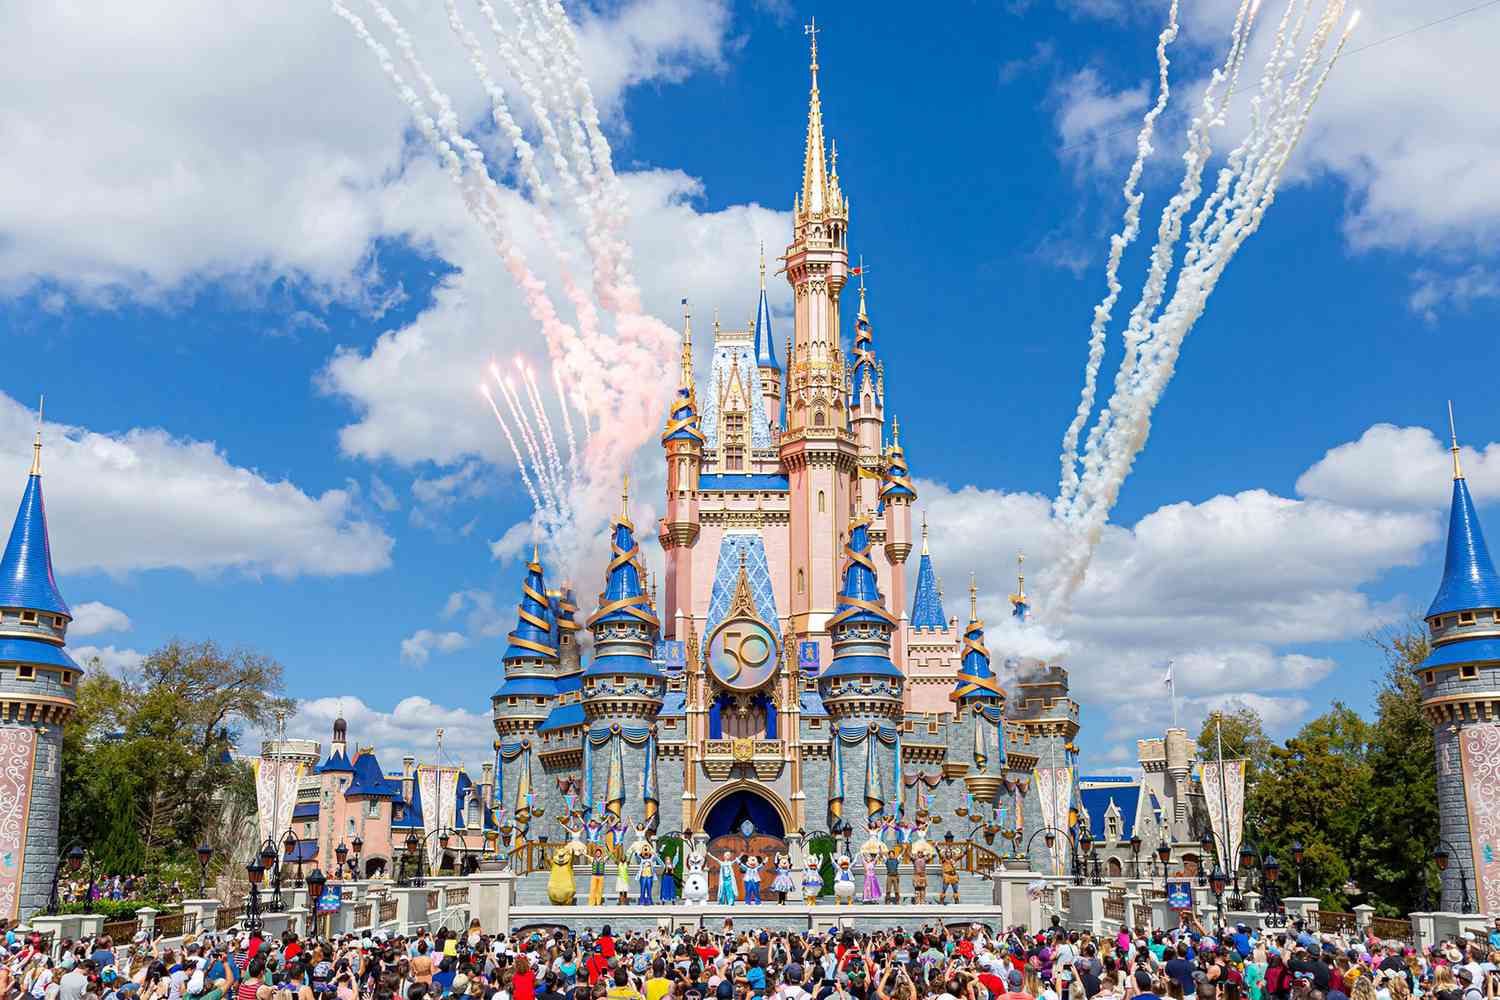 The Best Things to Do in Disney World Florida